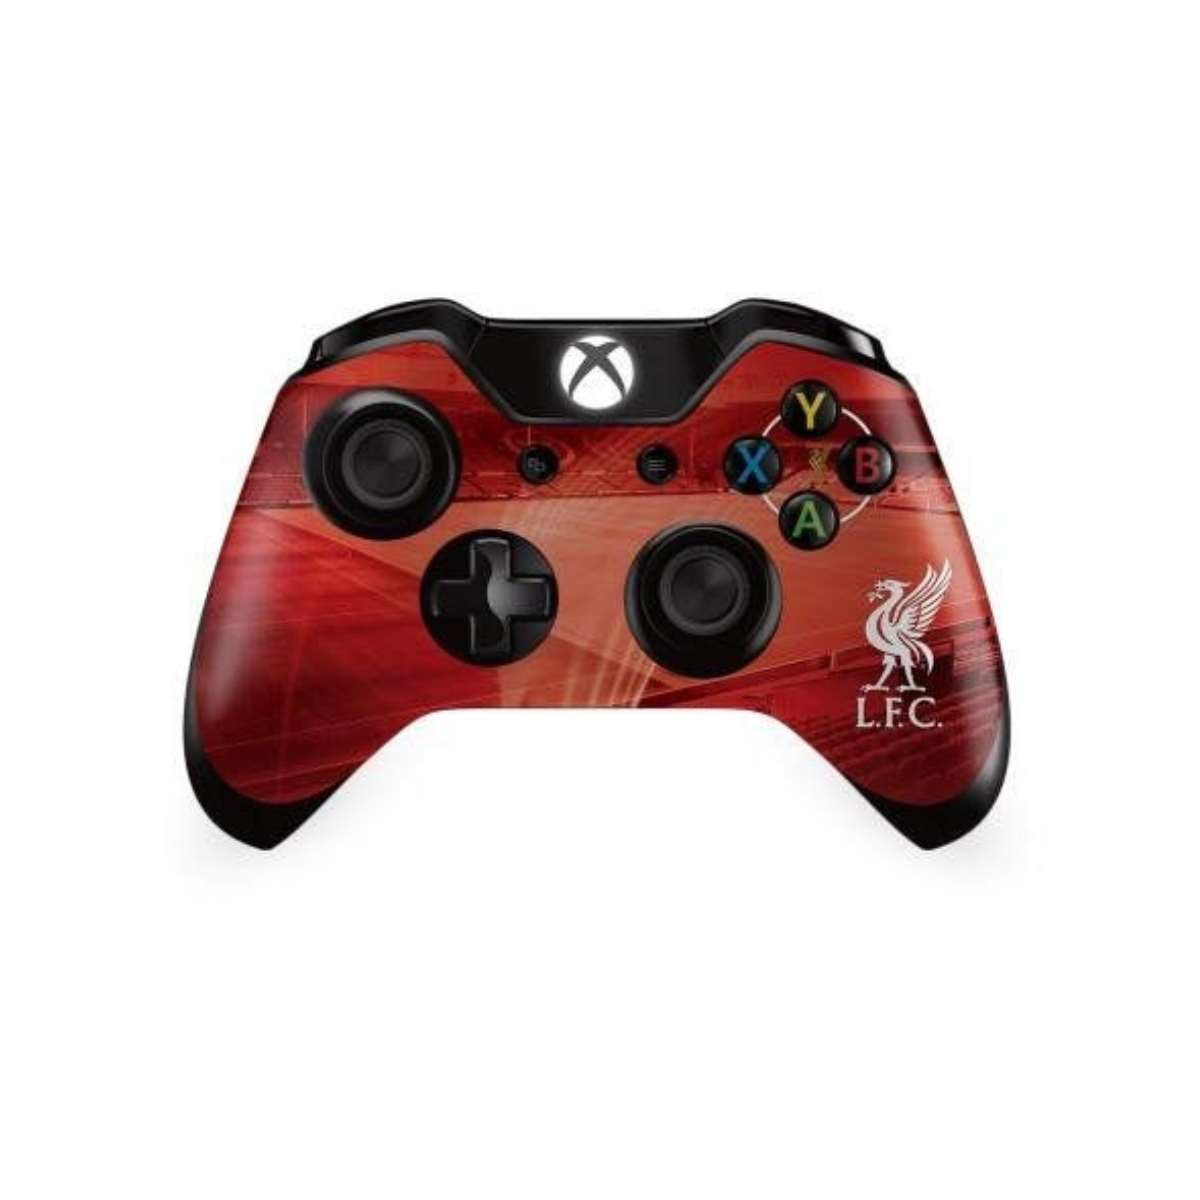 inToro Liverpool FC Skin for Xbox One Controller